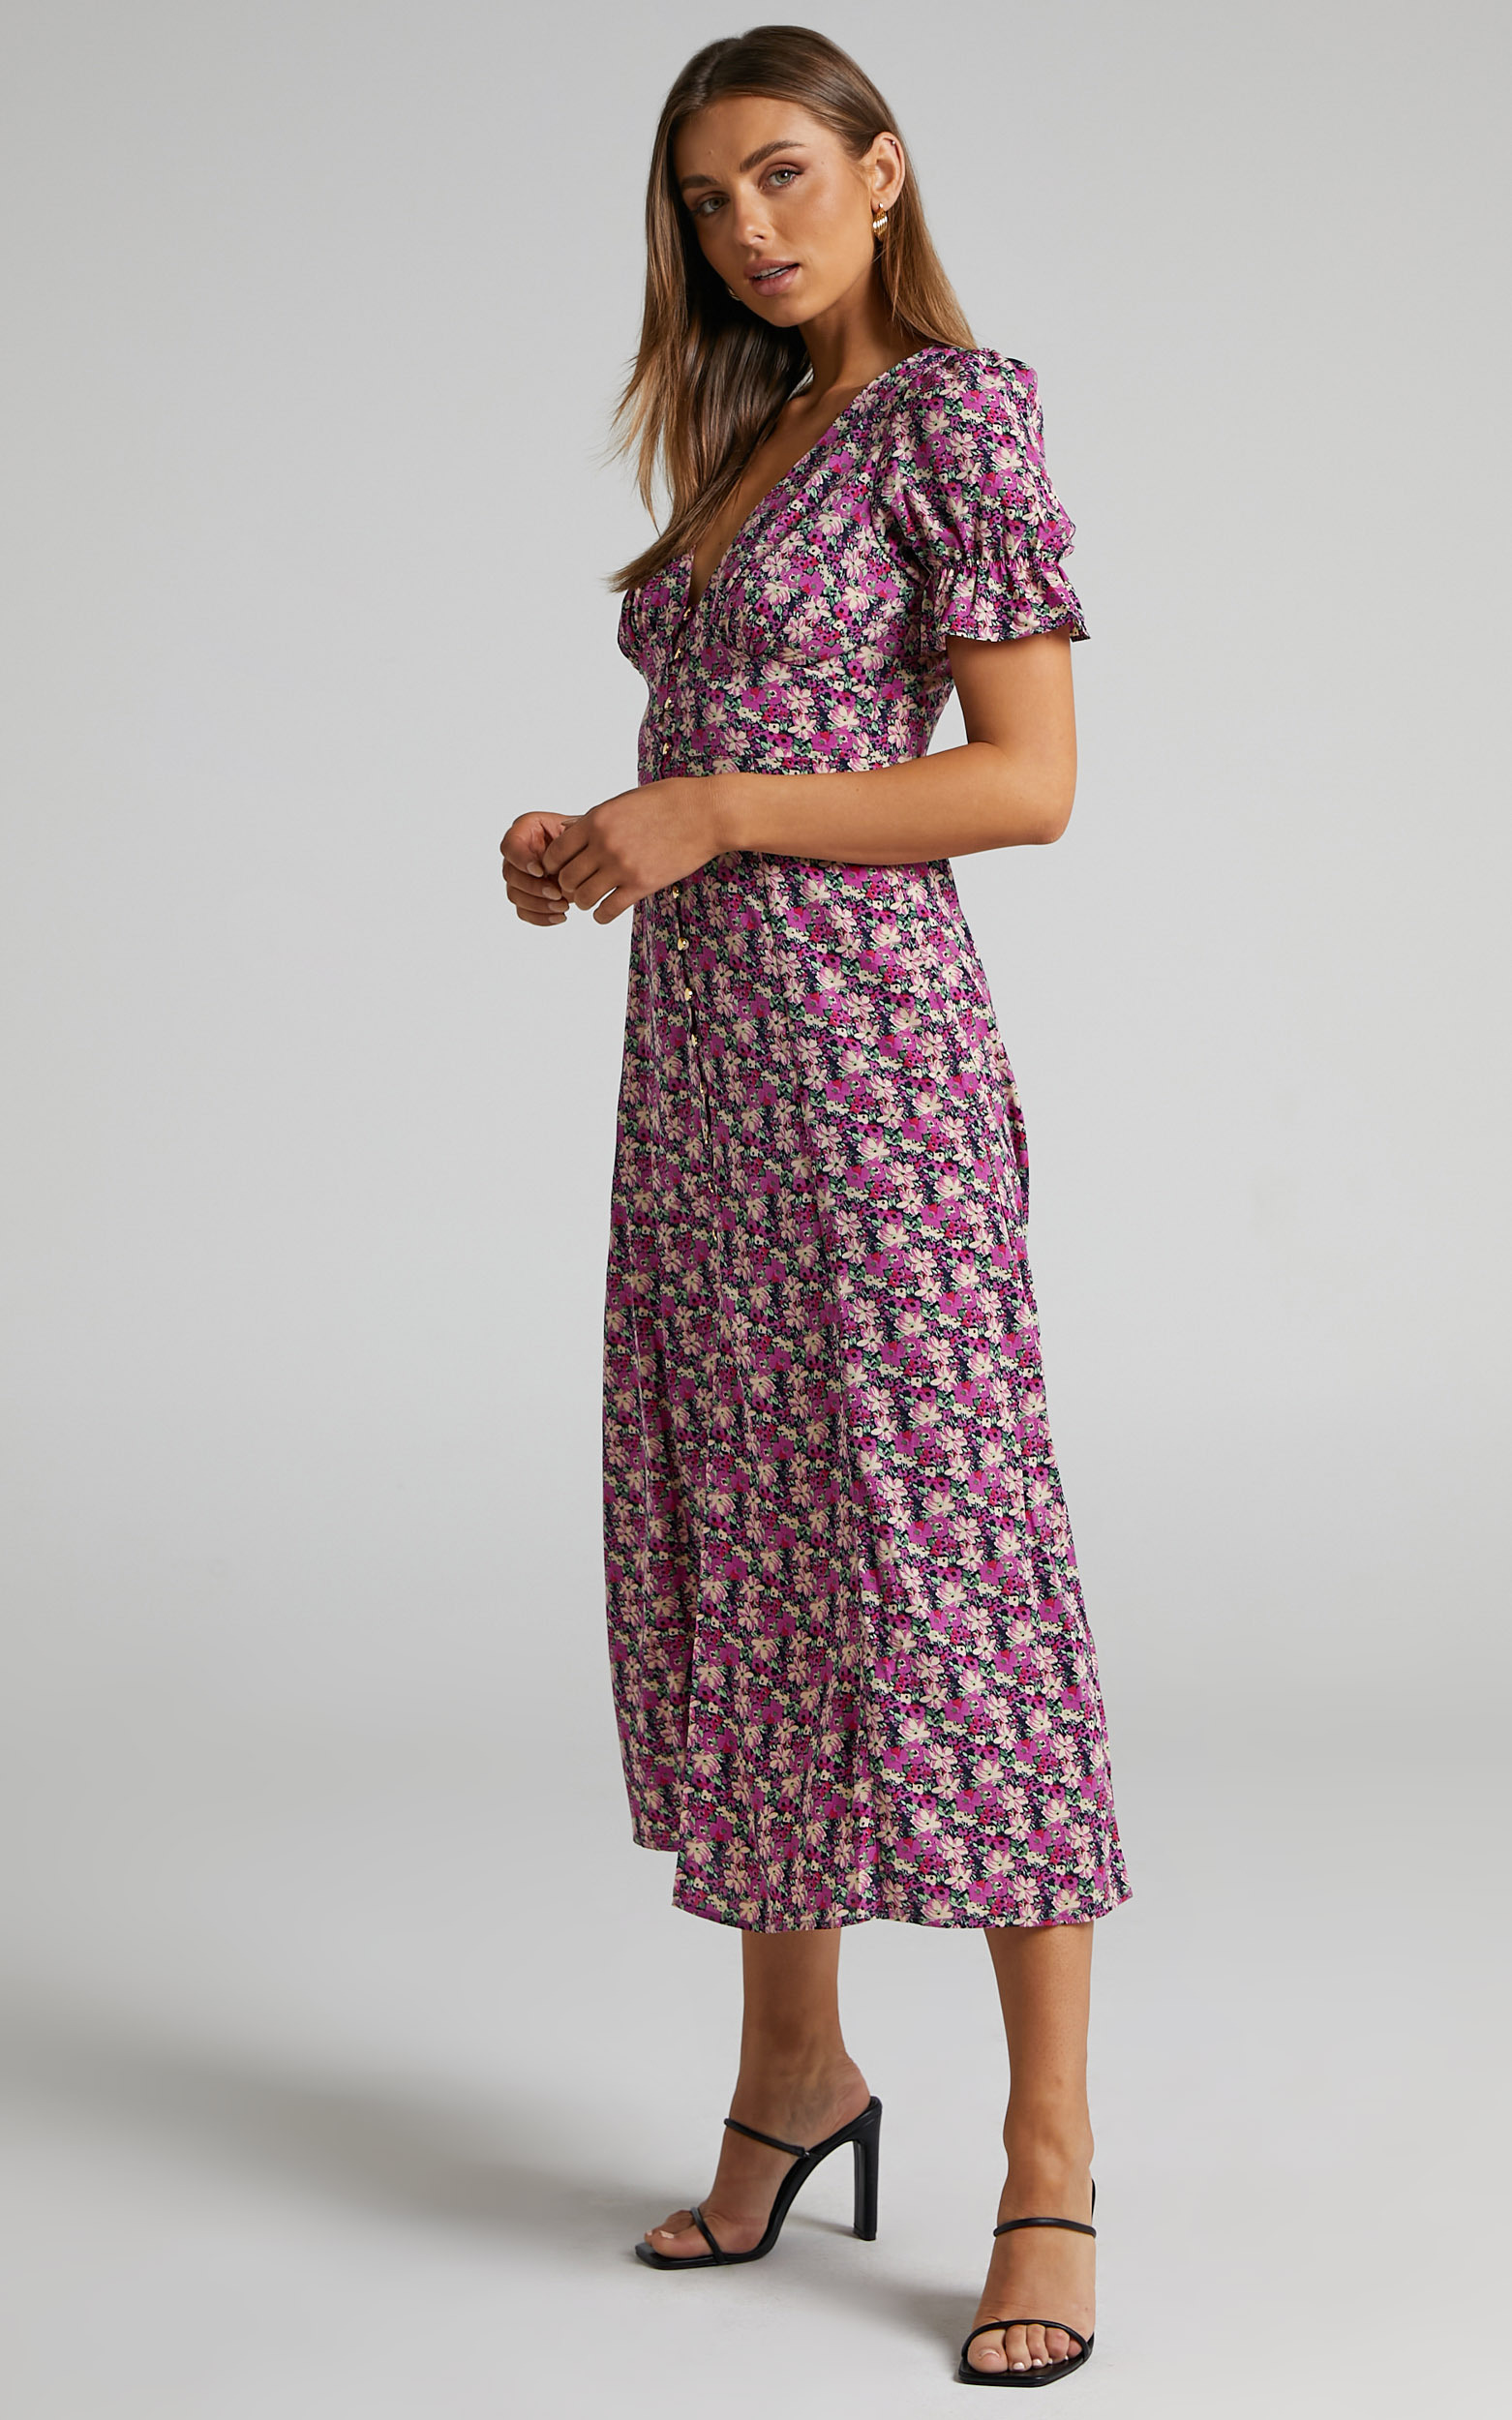 Adalina Short Puff Sleeve Button Down Maxi Dress in Floral - 06, PRP1, hi-res image number null